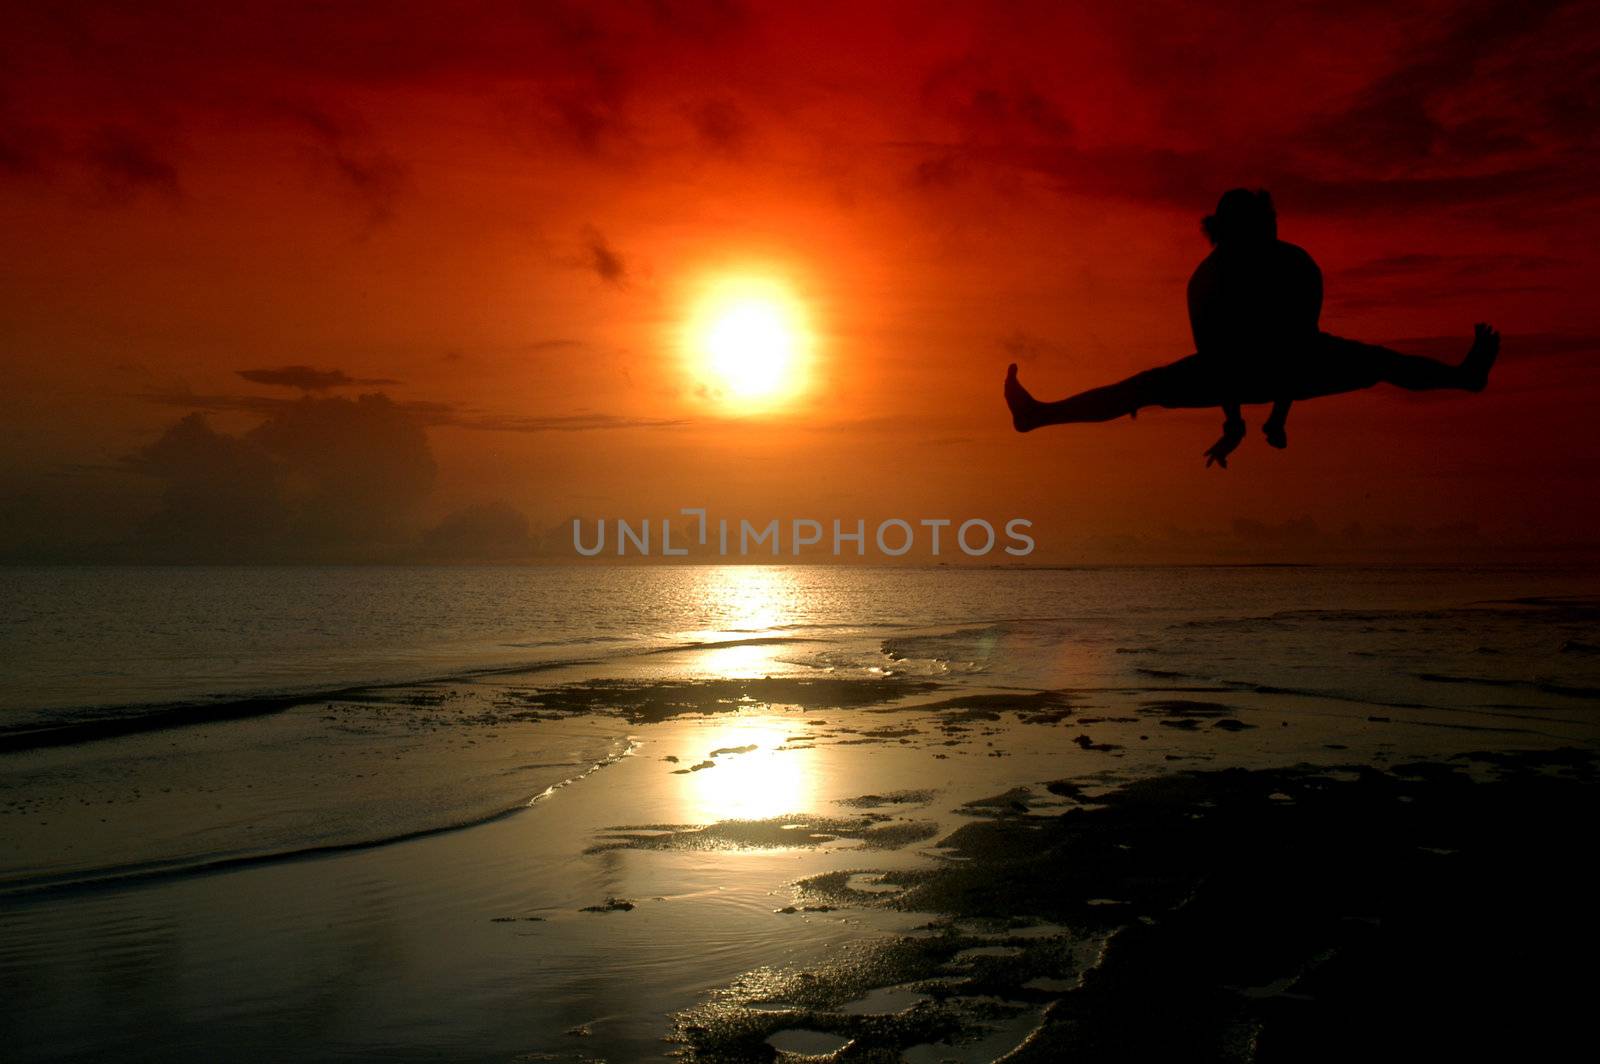  silhouette of a man jumping with sunrise baground, photographed by adding a filter gradation                        